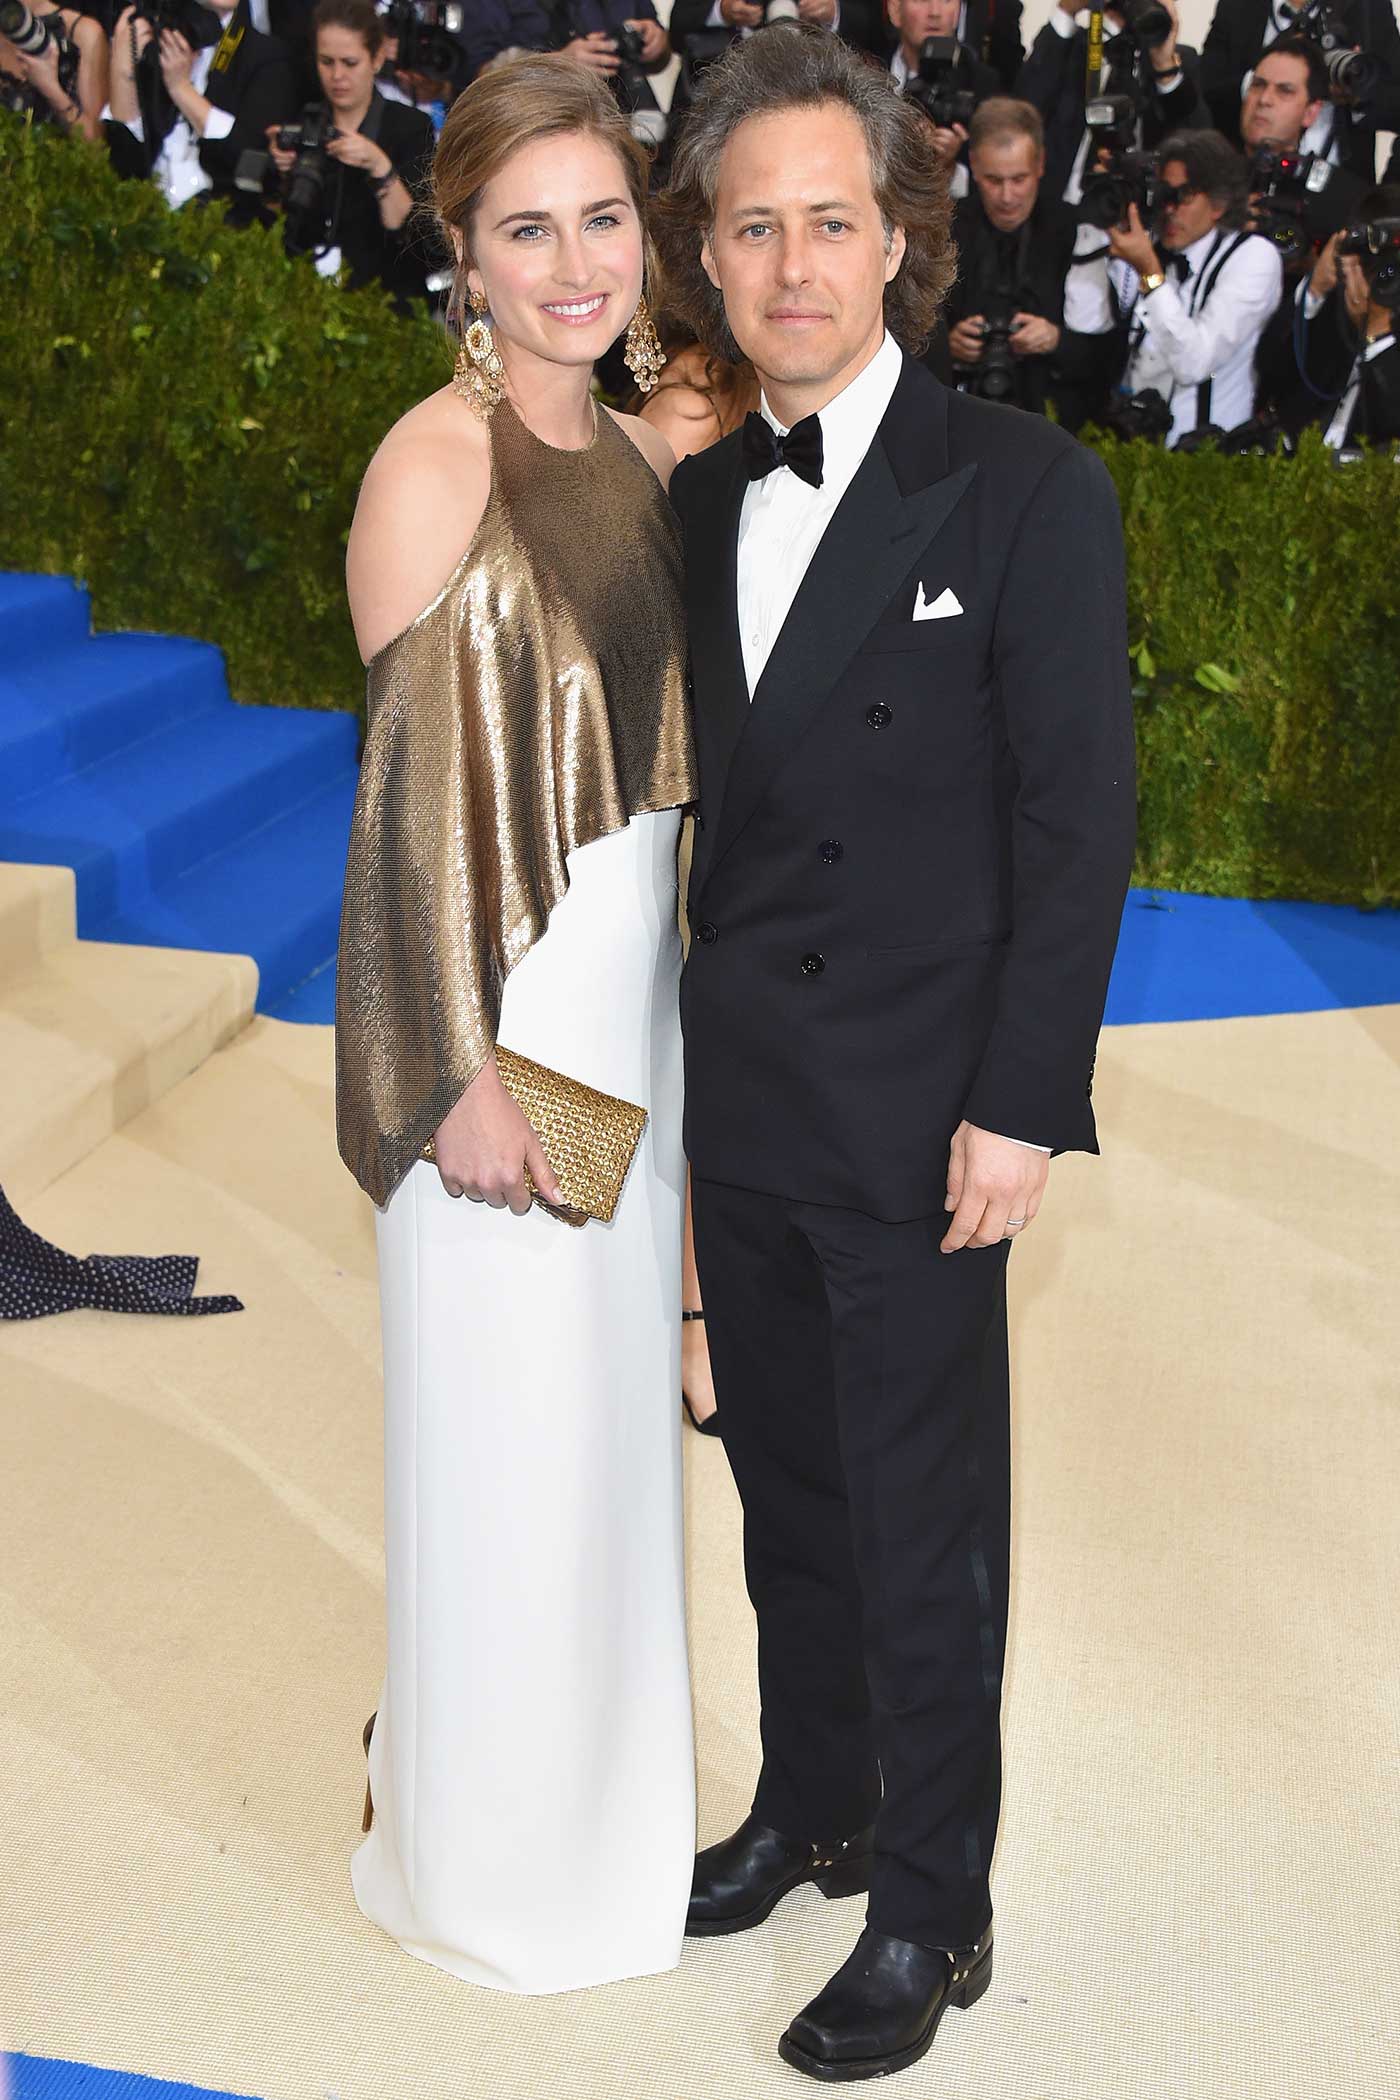 David Lauren wore a Ralph Lauren Purple Label tuxedo, and Lauren Bush Lauren donned a Ralph Lauren Collection silk cady evening dress with a sequined draped overlay